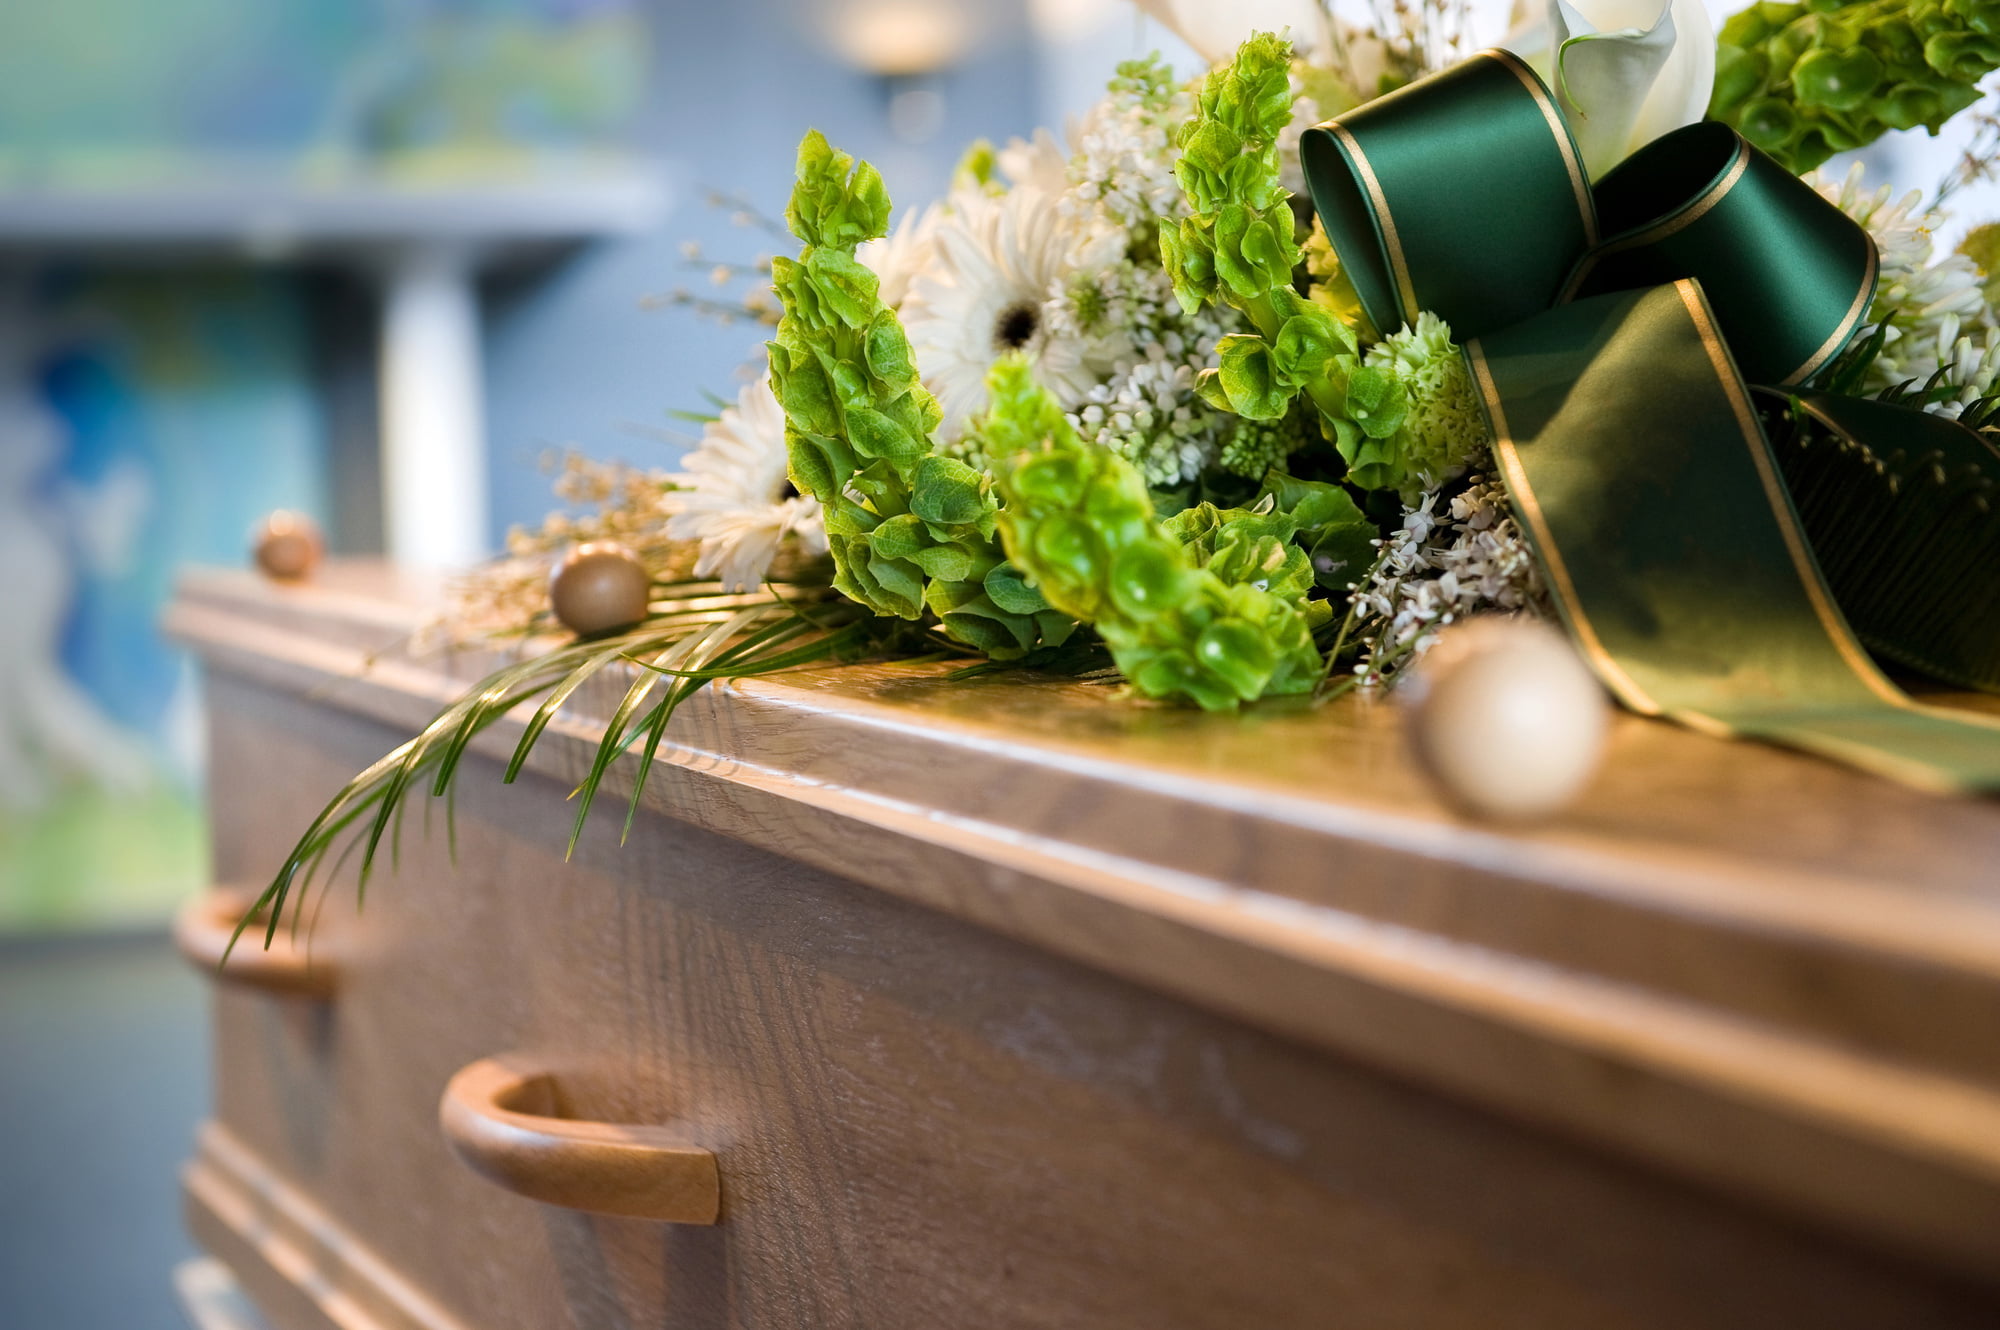 Planning ahead can make the grieving process easier for your loved ones. Read our tips about funeral planning including ceremonies, costs, caskets and more.